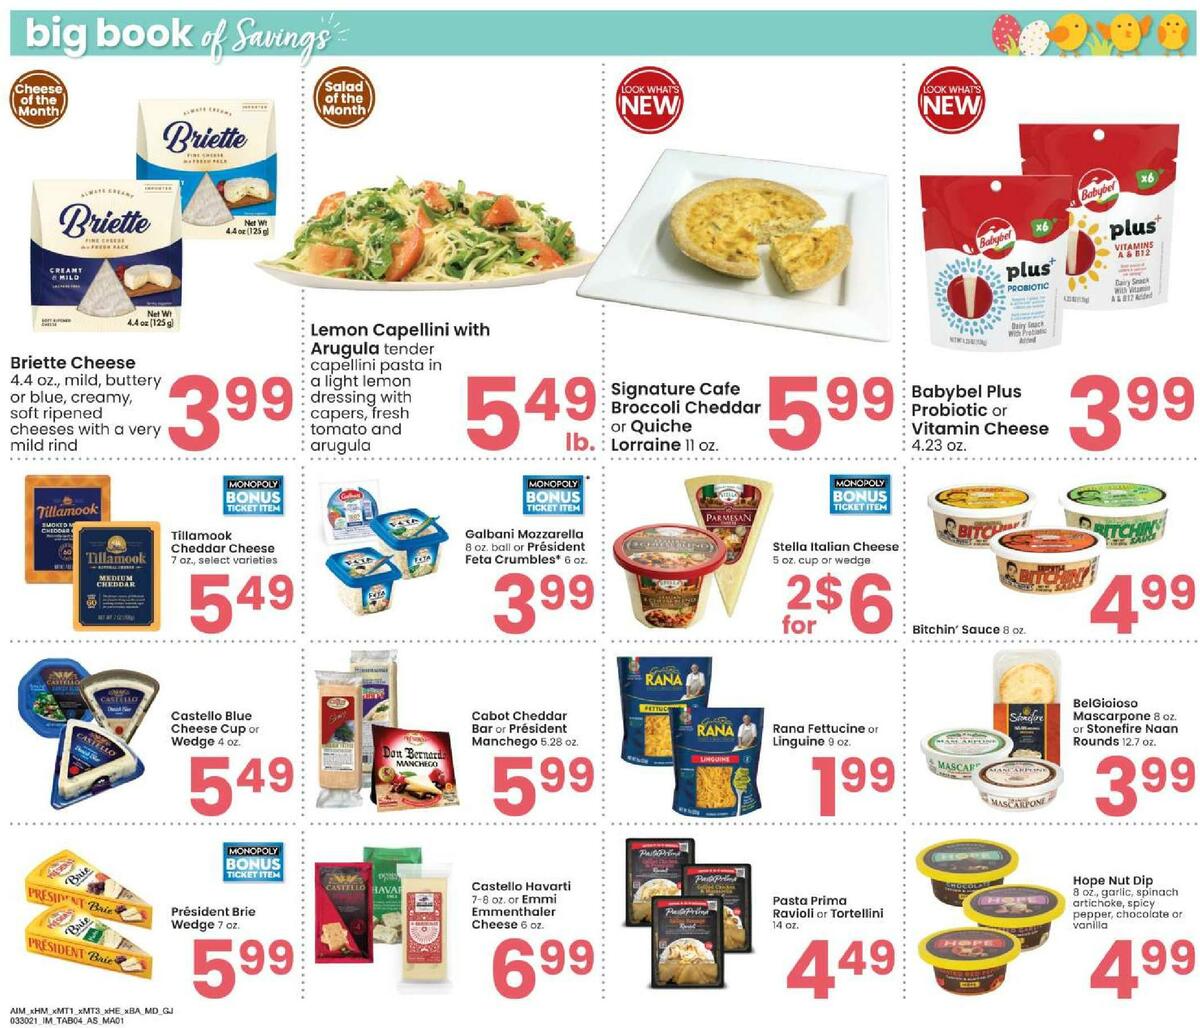 Albertsons Big Book of Savings Weekly Ad from March 30